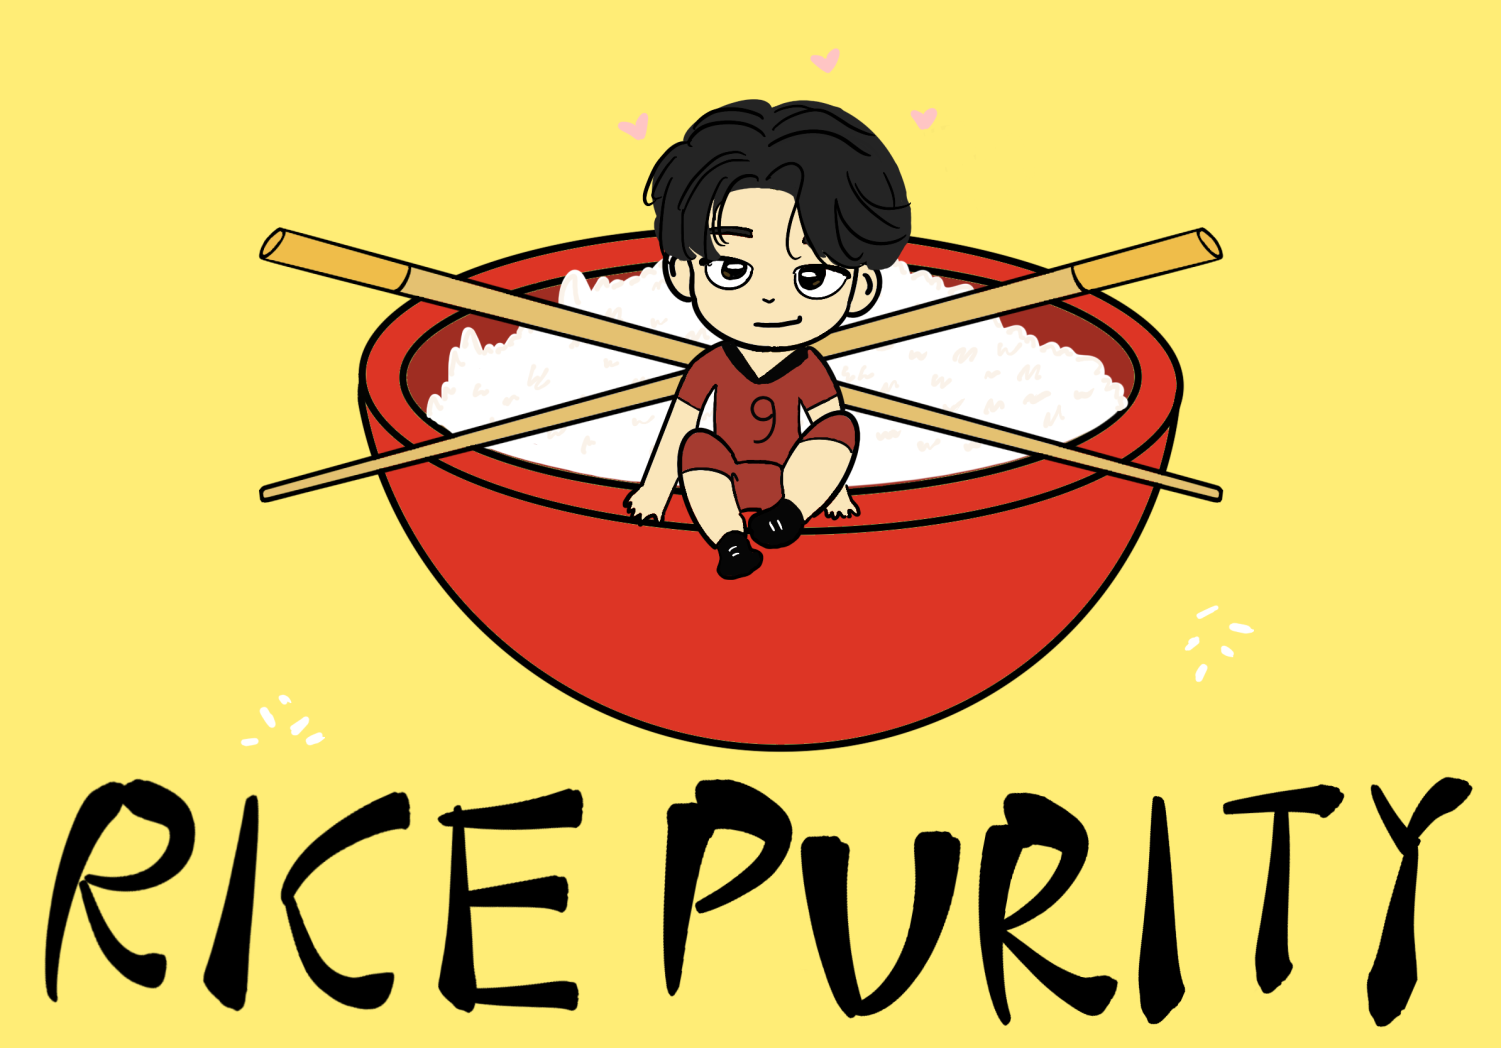 An+illustration+showing+the+title+of+the+column+Rice+Purity+under+a+red+bowl+of+white+rice+with+chopsticks.